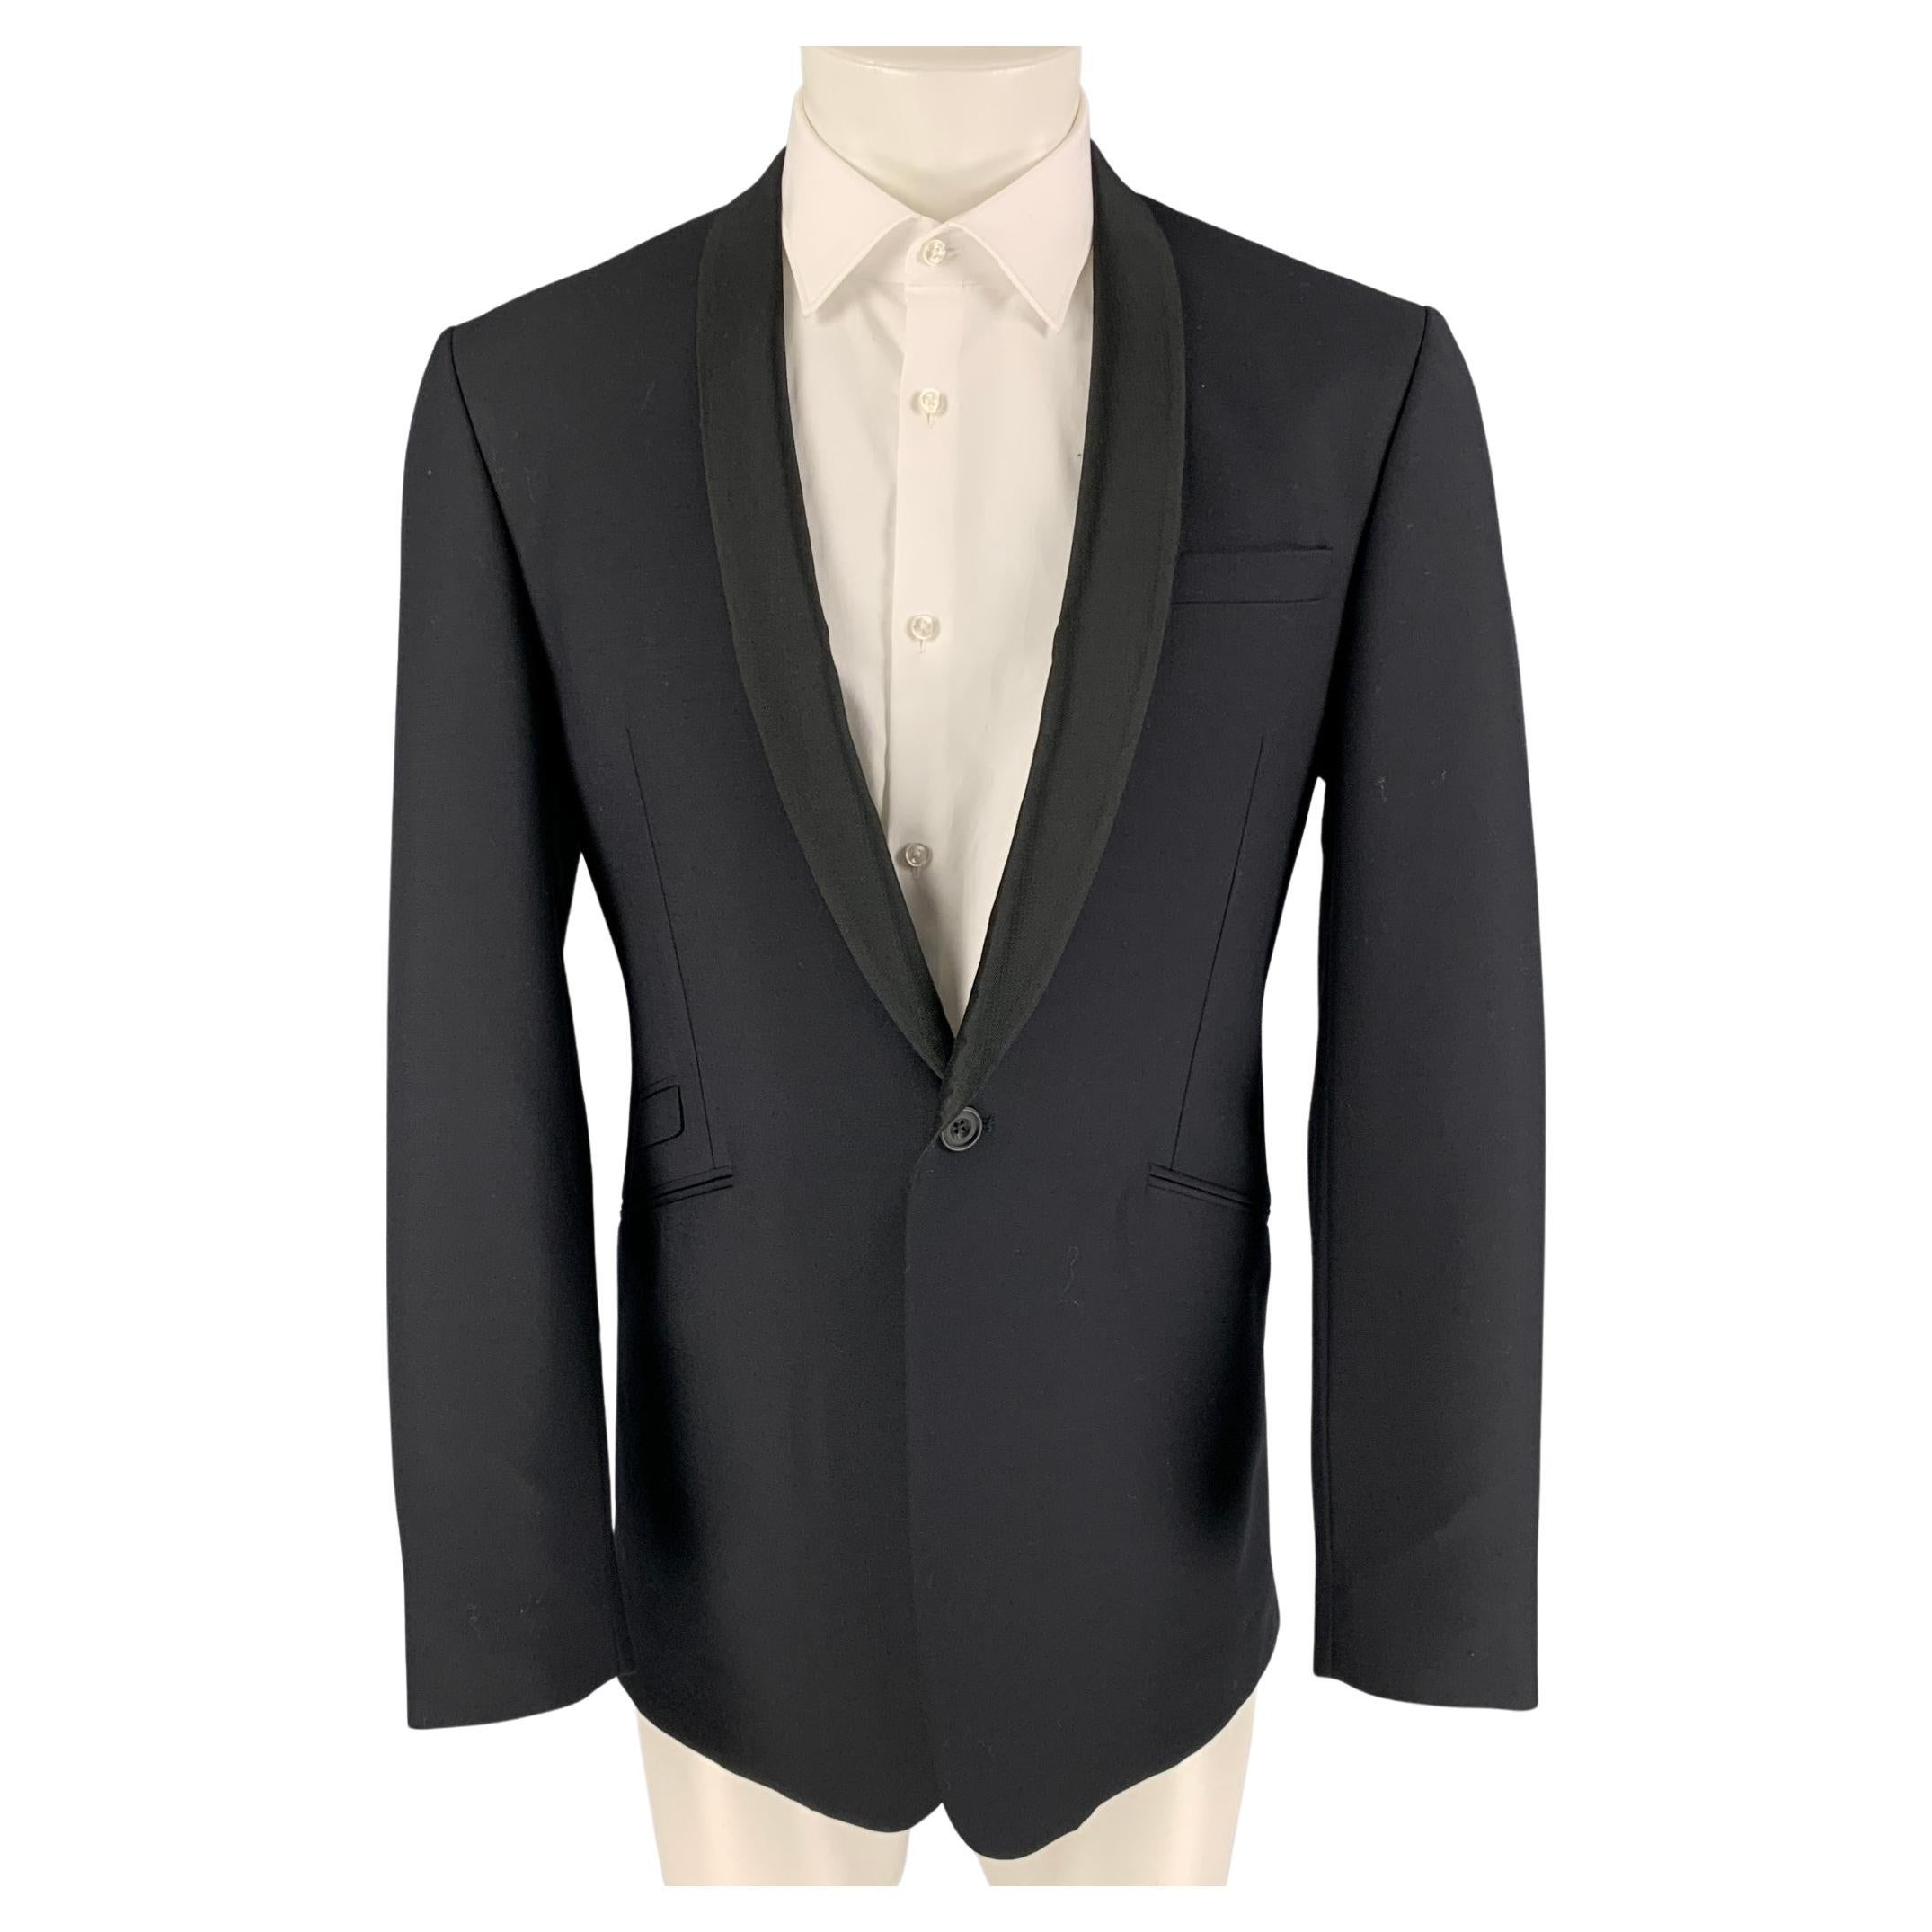 Aquascutum AQUASCUTUM Grey 100% Wool Single-breasted Structured Fitted Suit Jacket 40R 